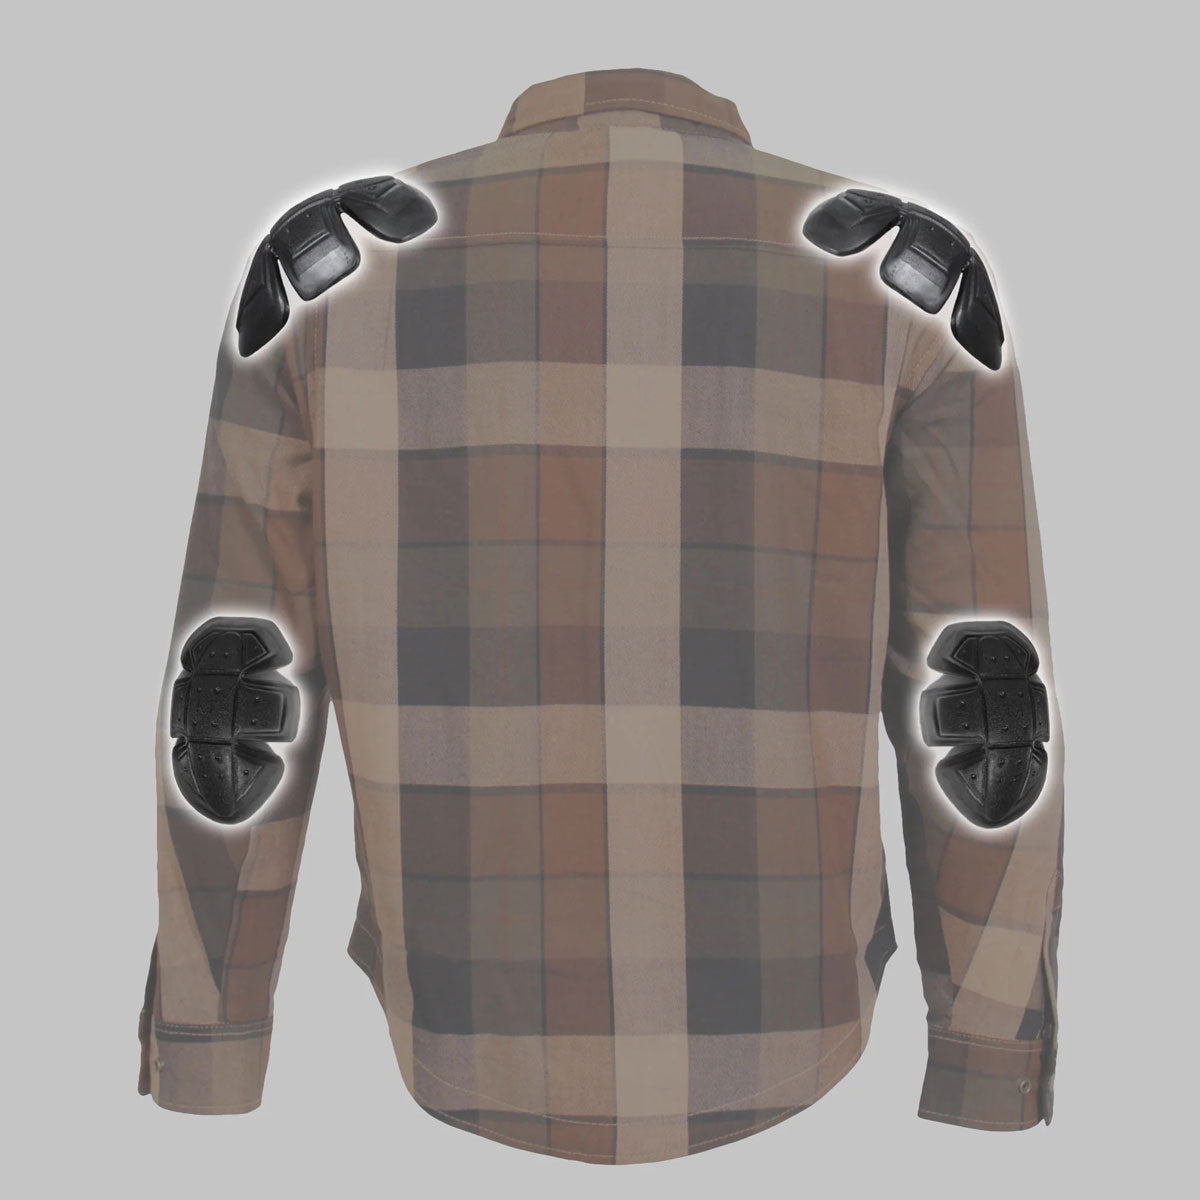 Hot Leathers JKM3007 Men's Black and Brown Armored Flannel Shirt